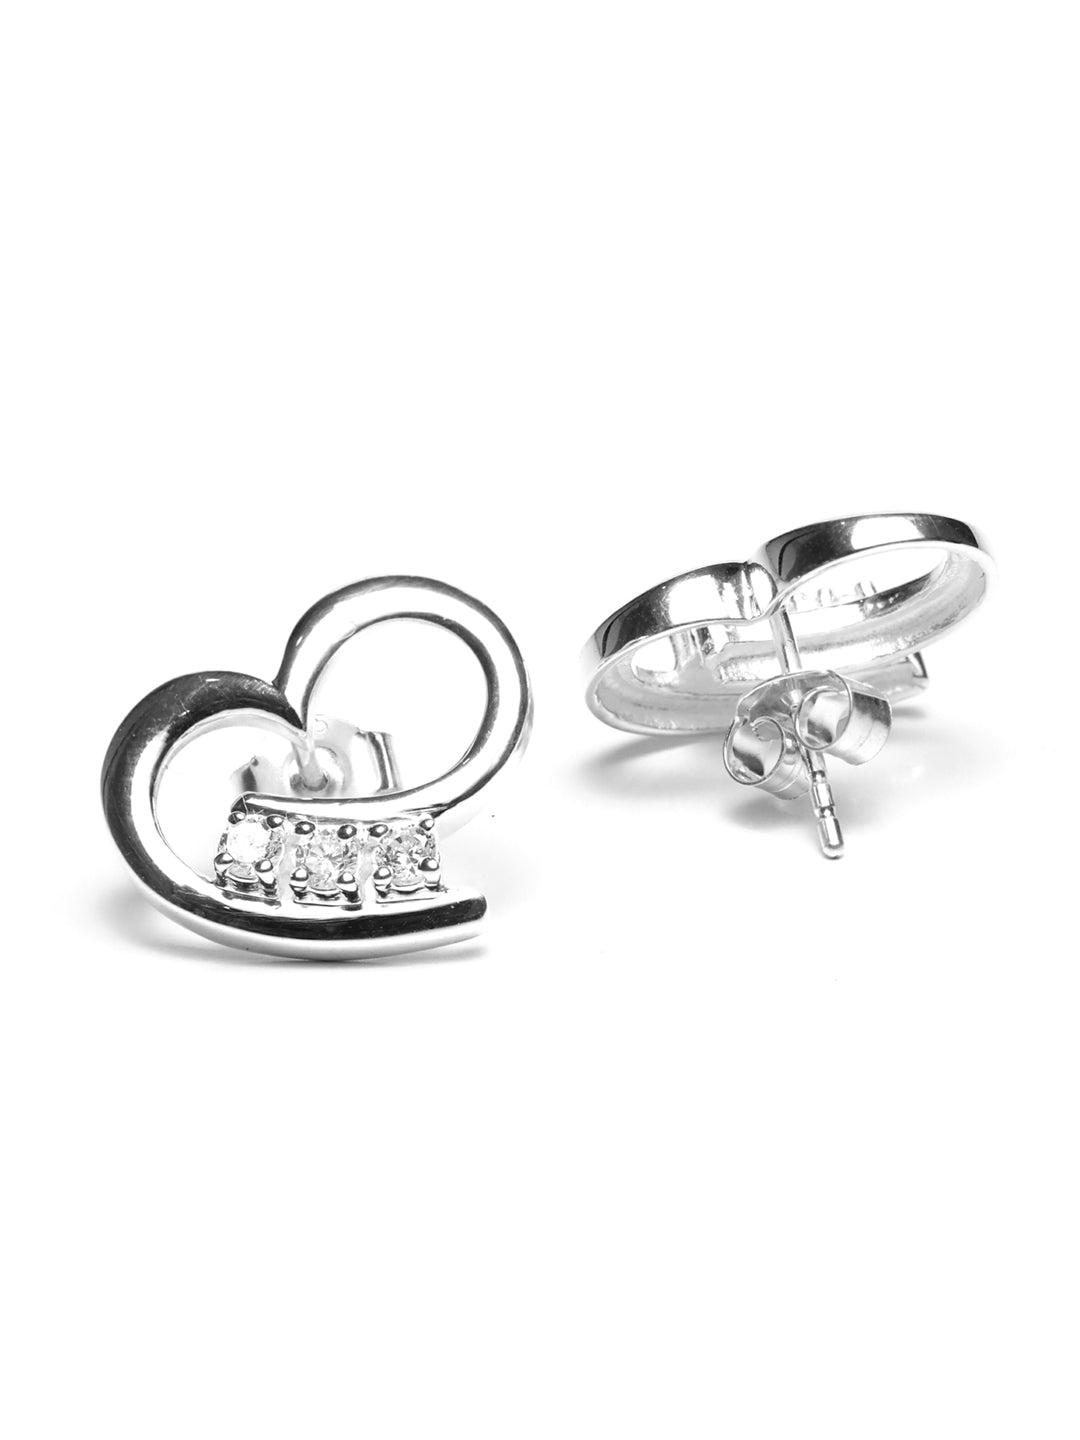 Curled Heart Sterling Silver Zircon Studs